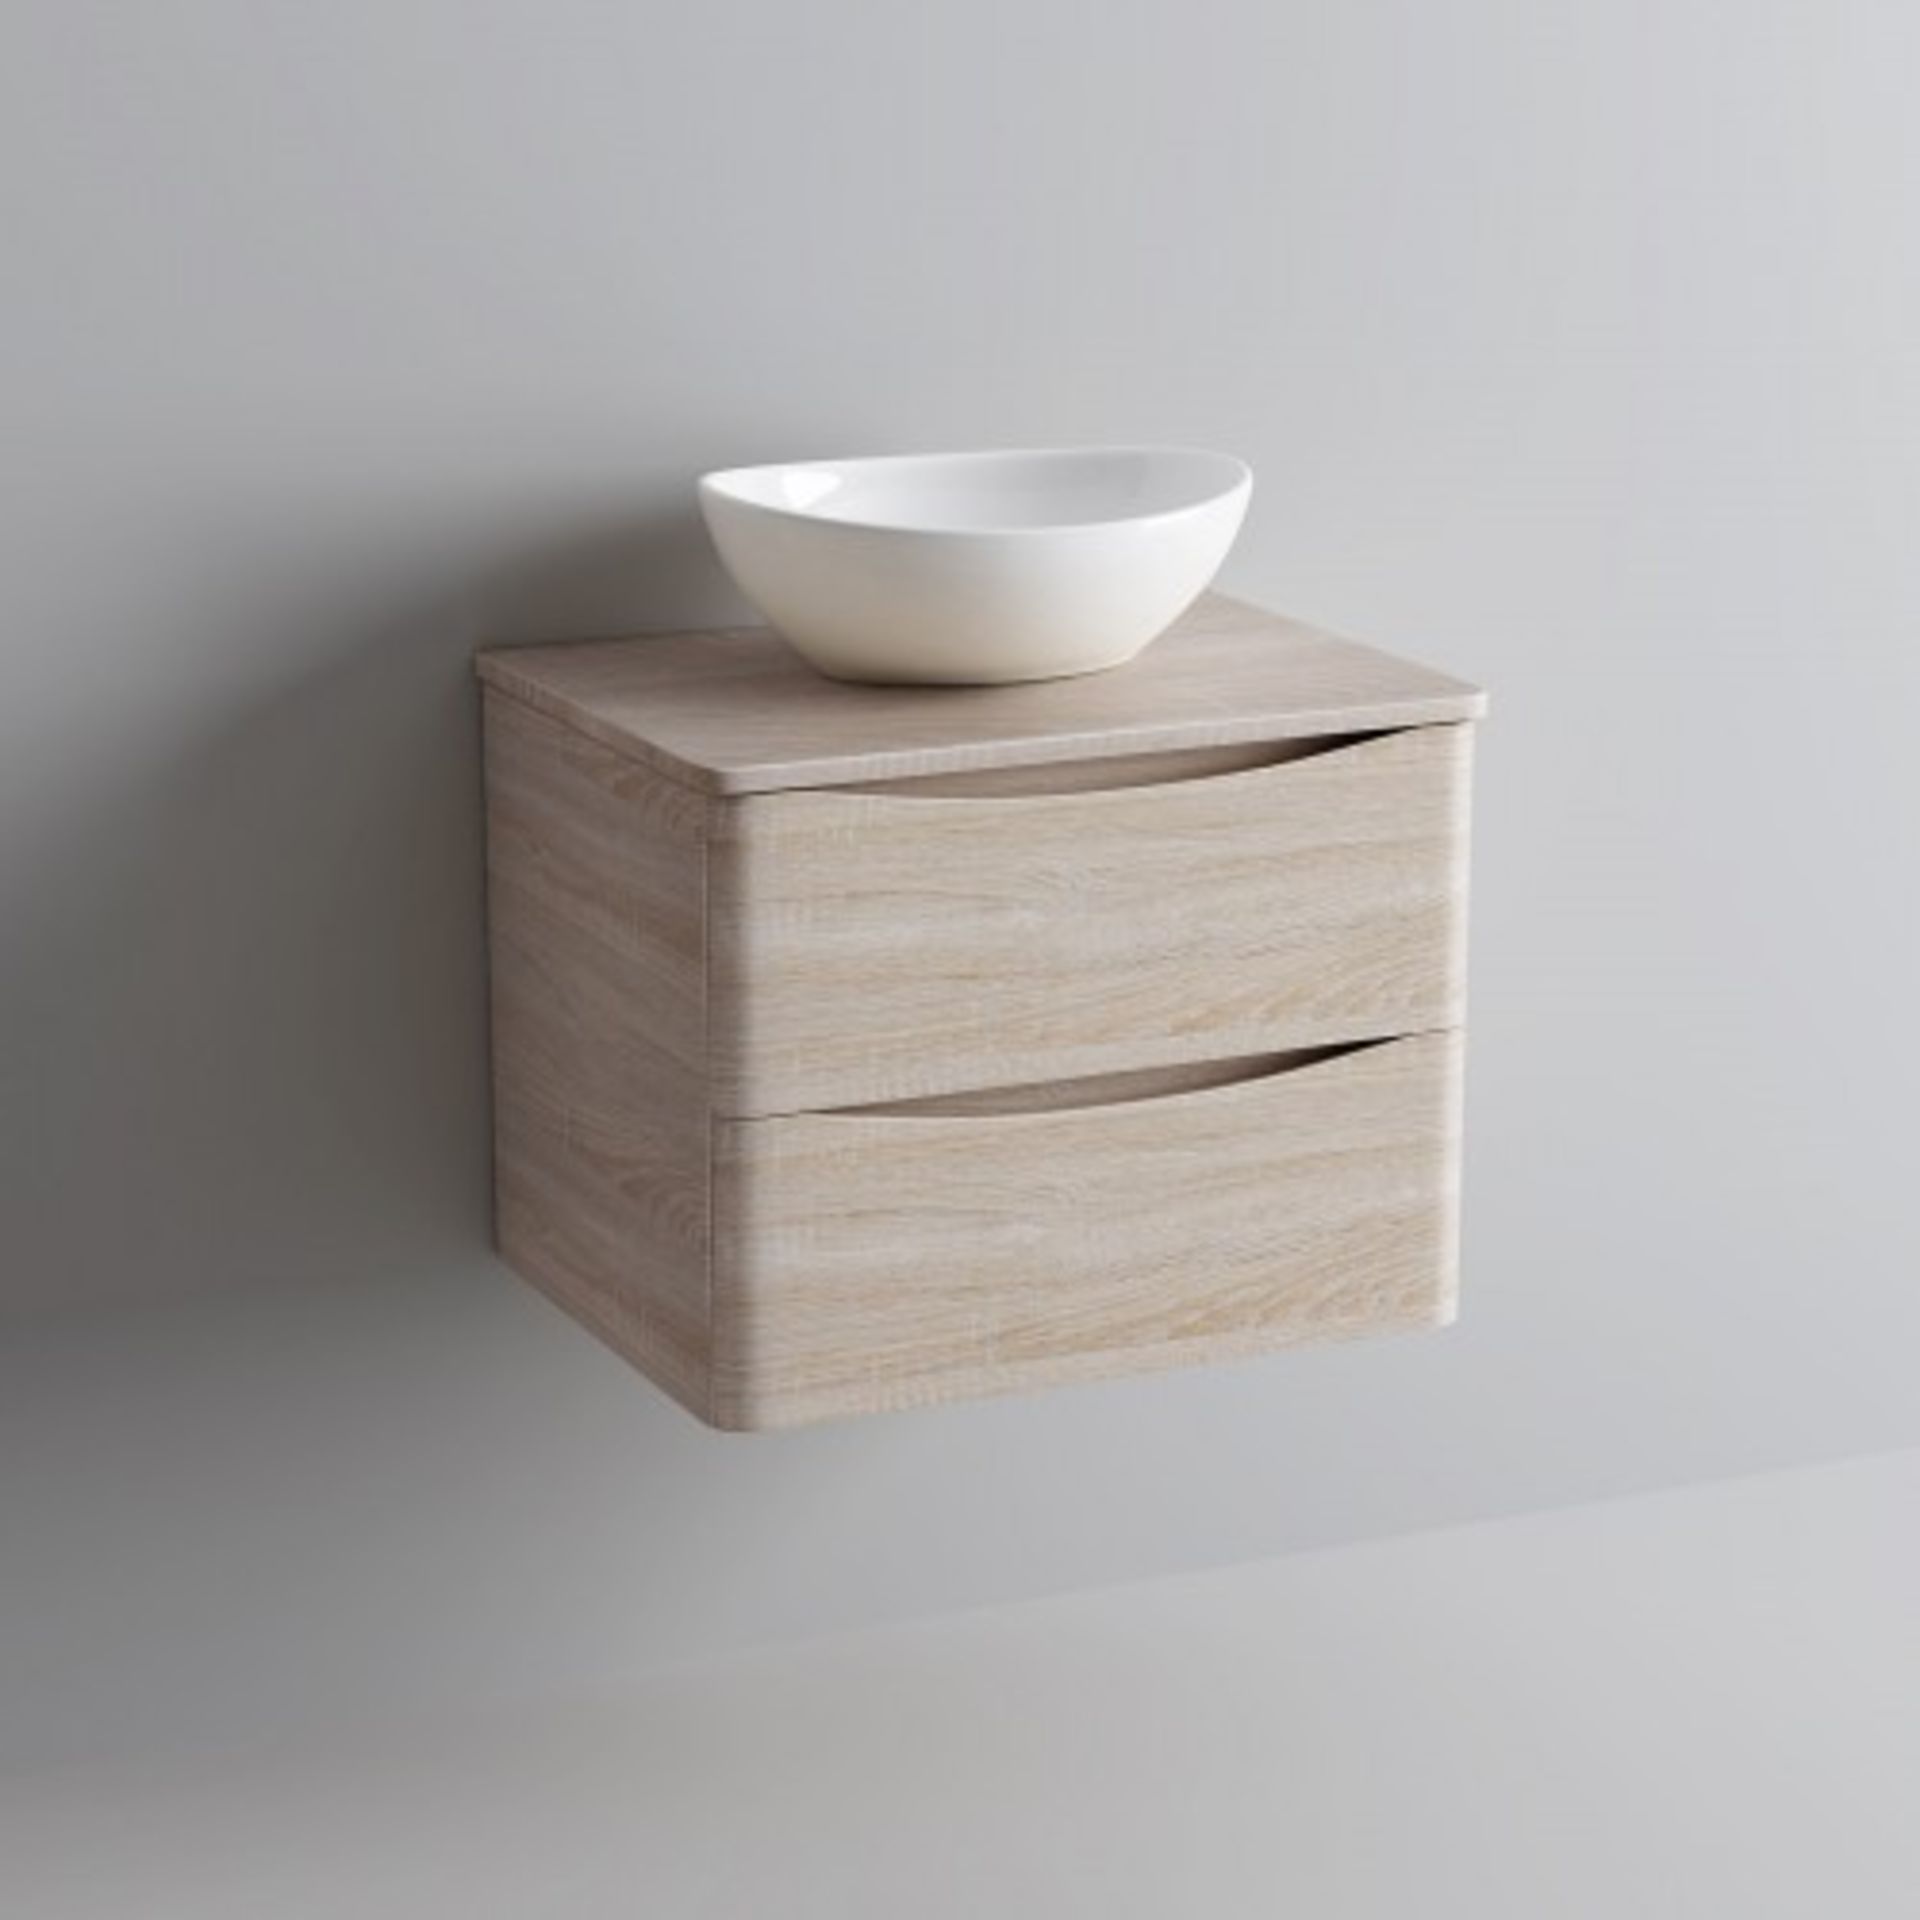 NEW & BOXED 600mm Austin II Light Oak Effect Countertop Unit and Basin Drawer Unit - Wall Hung.... - Image 2 of 2